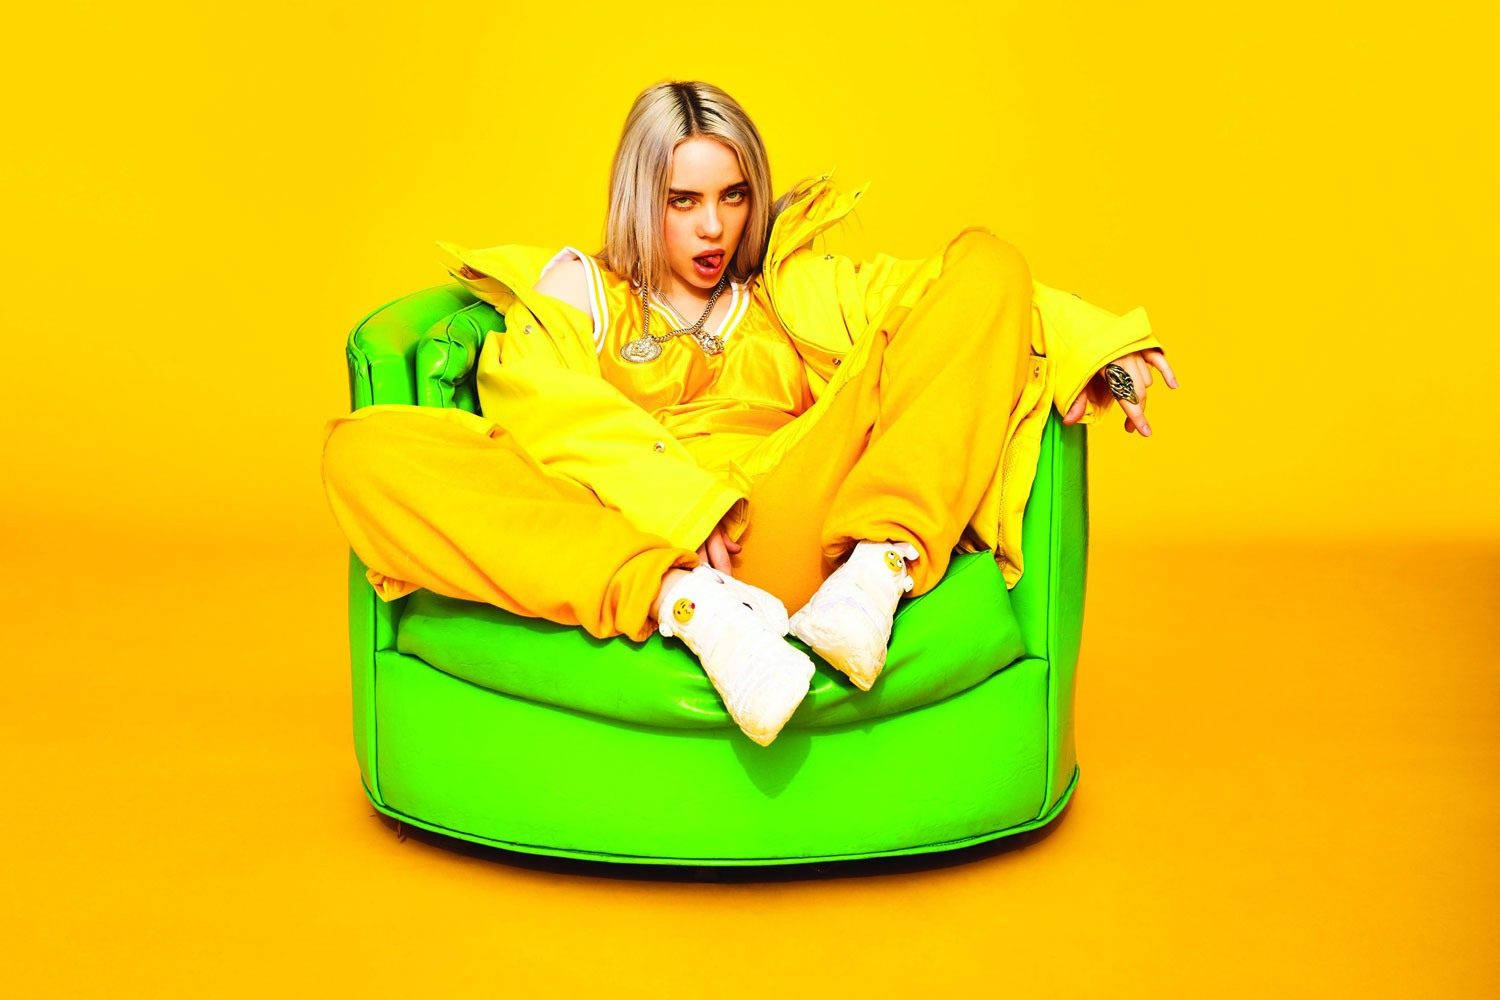 Is This A Hint Billie Eilish Is Releasing Her New Album In March? Wallpaper